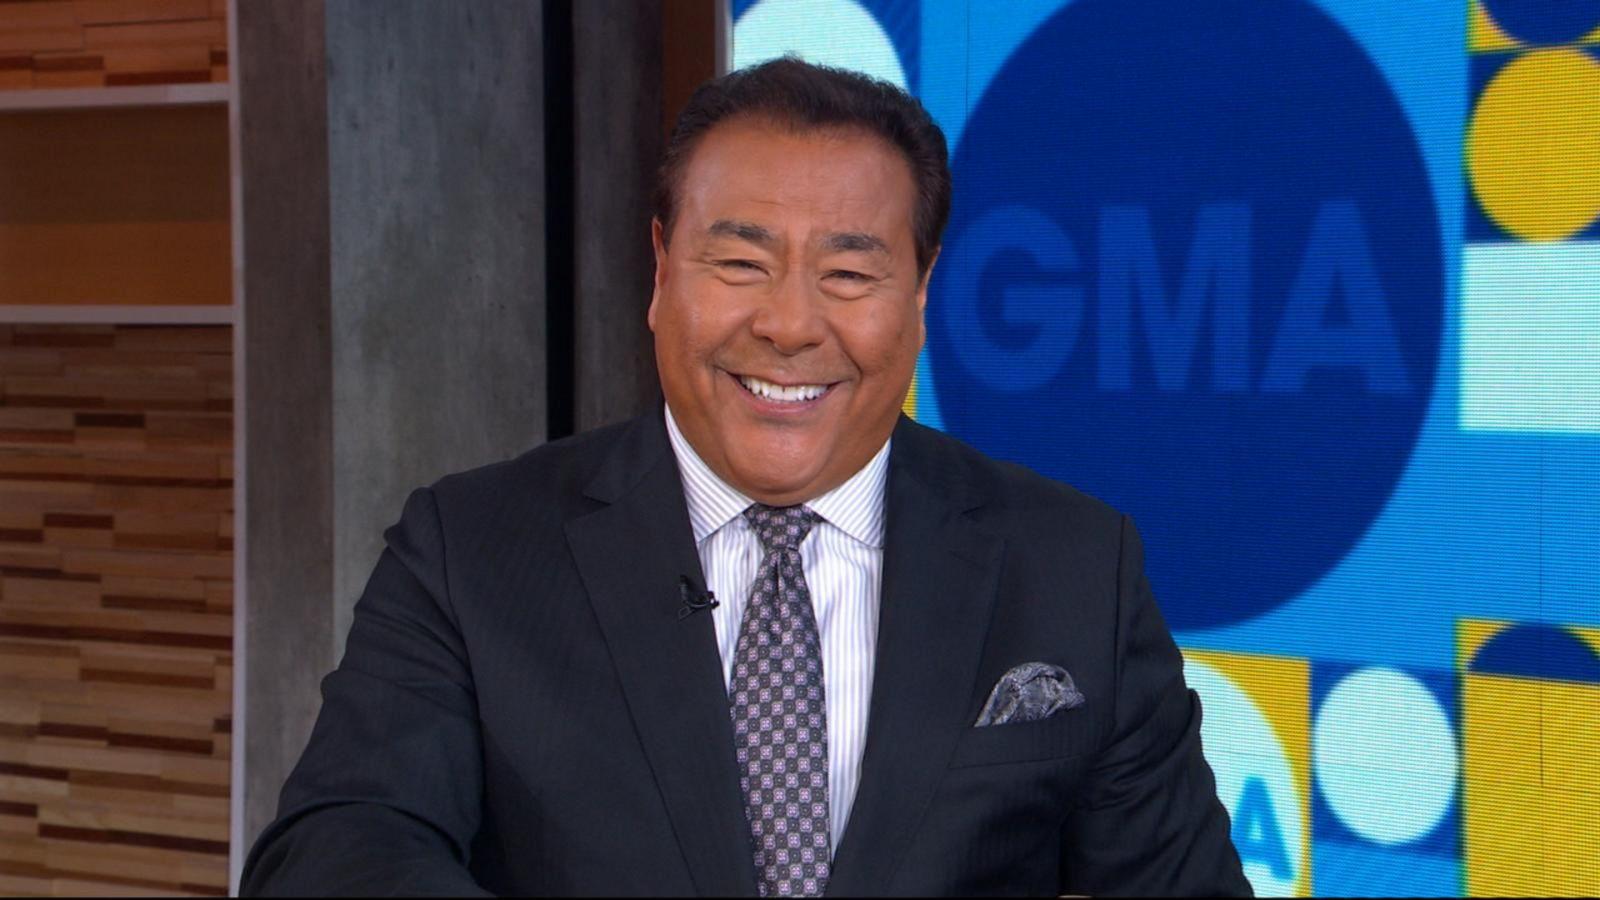 John Quinones shares a clip from new season of 'What Would You Do?'